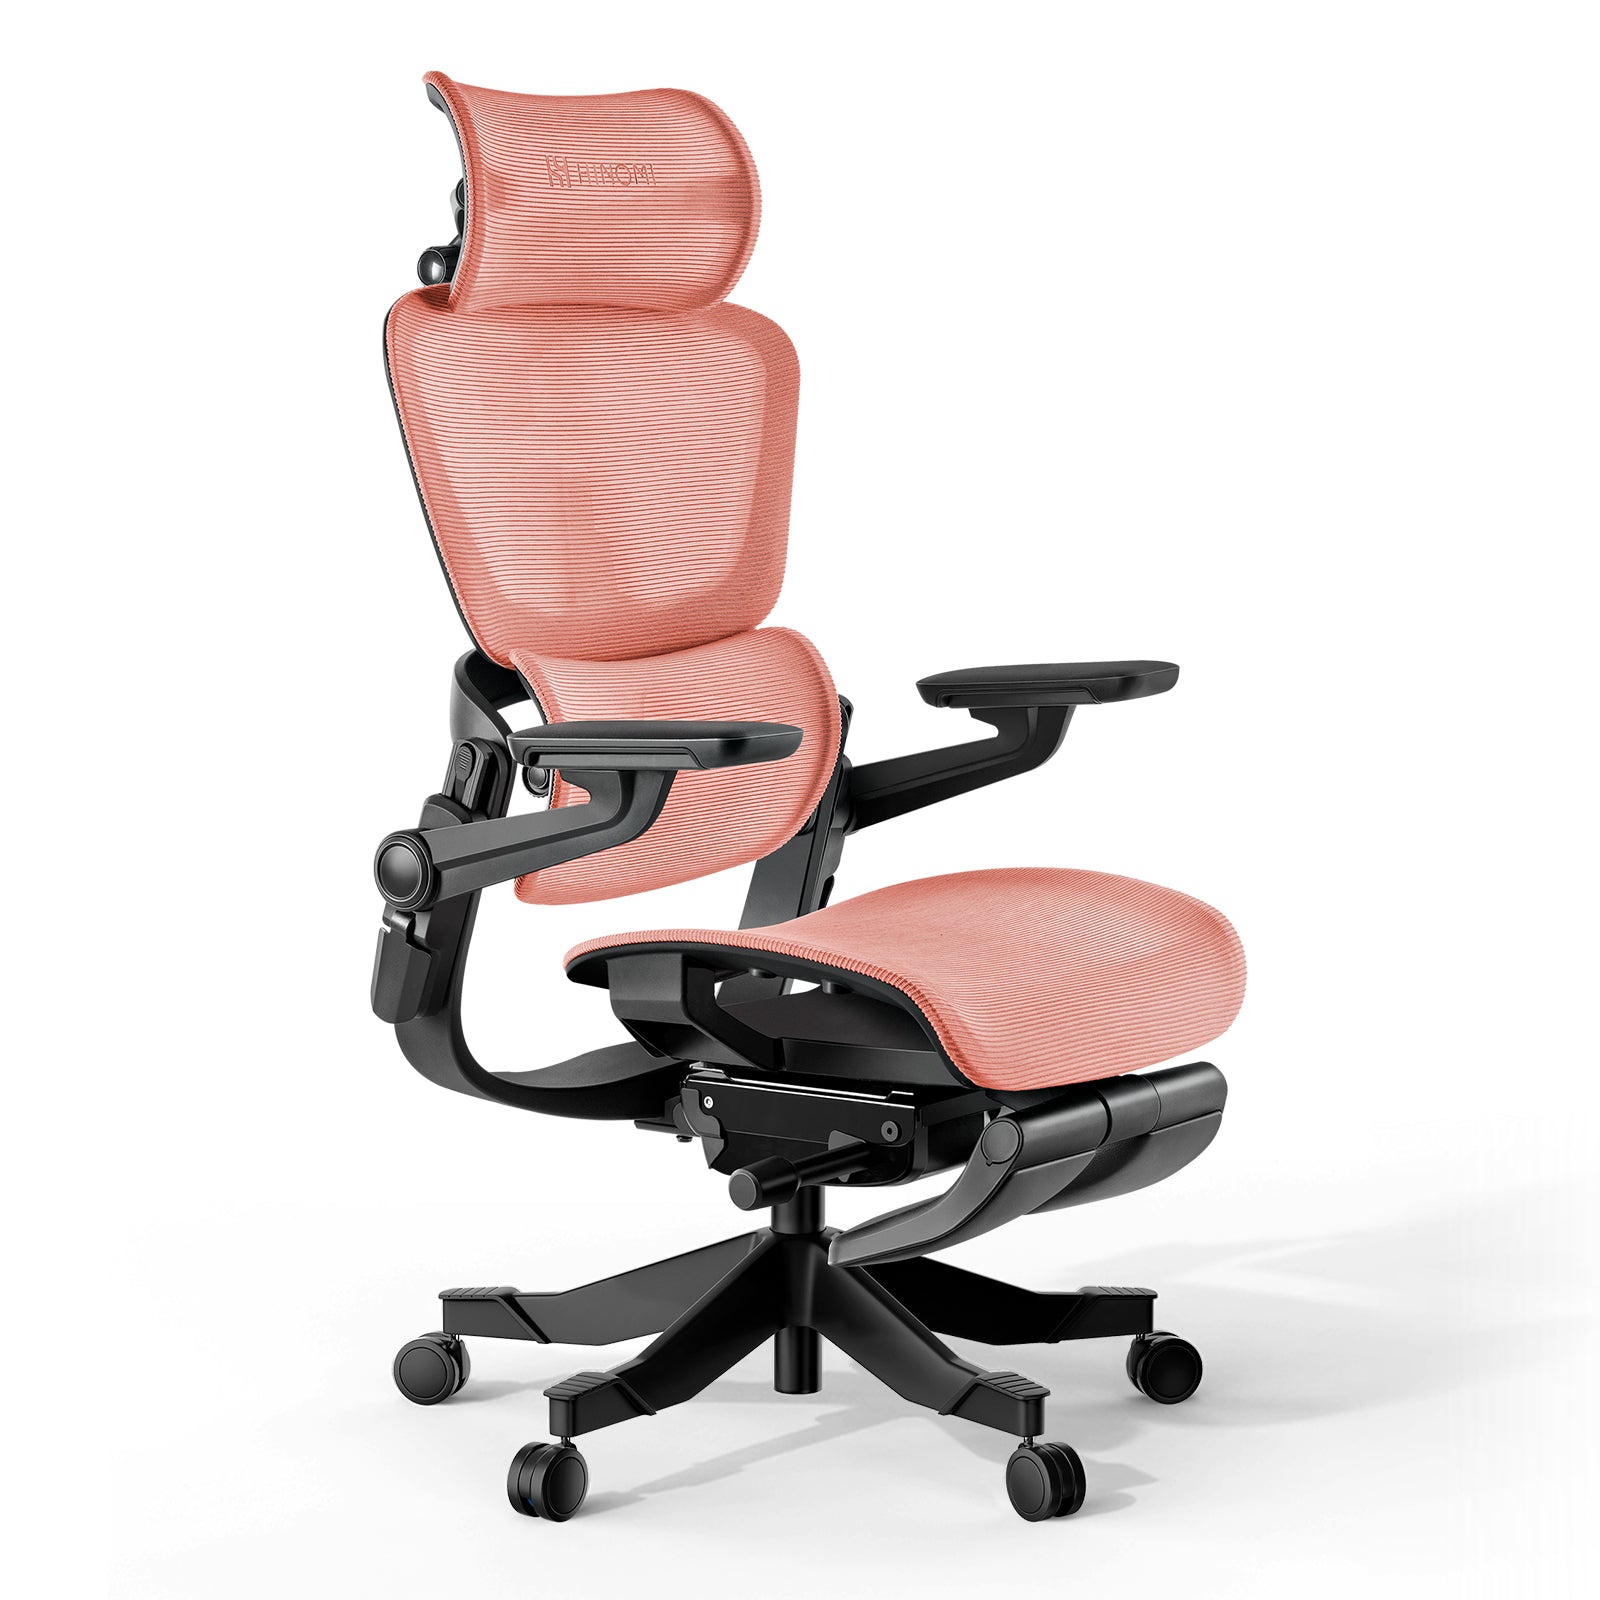 Hinomi H1 Pro Office Chair - with folding feature? : r/ErgonomicOfficeChairs